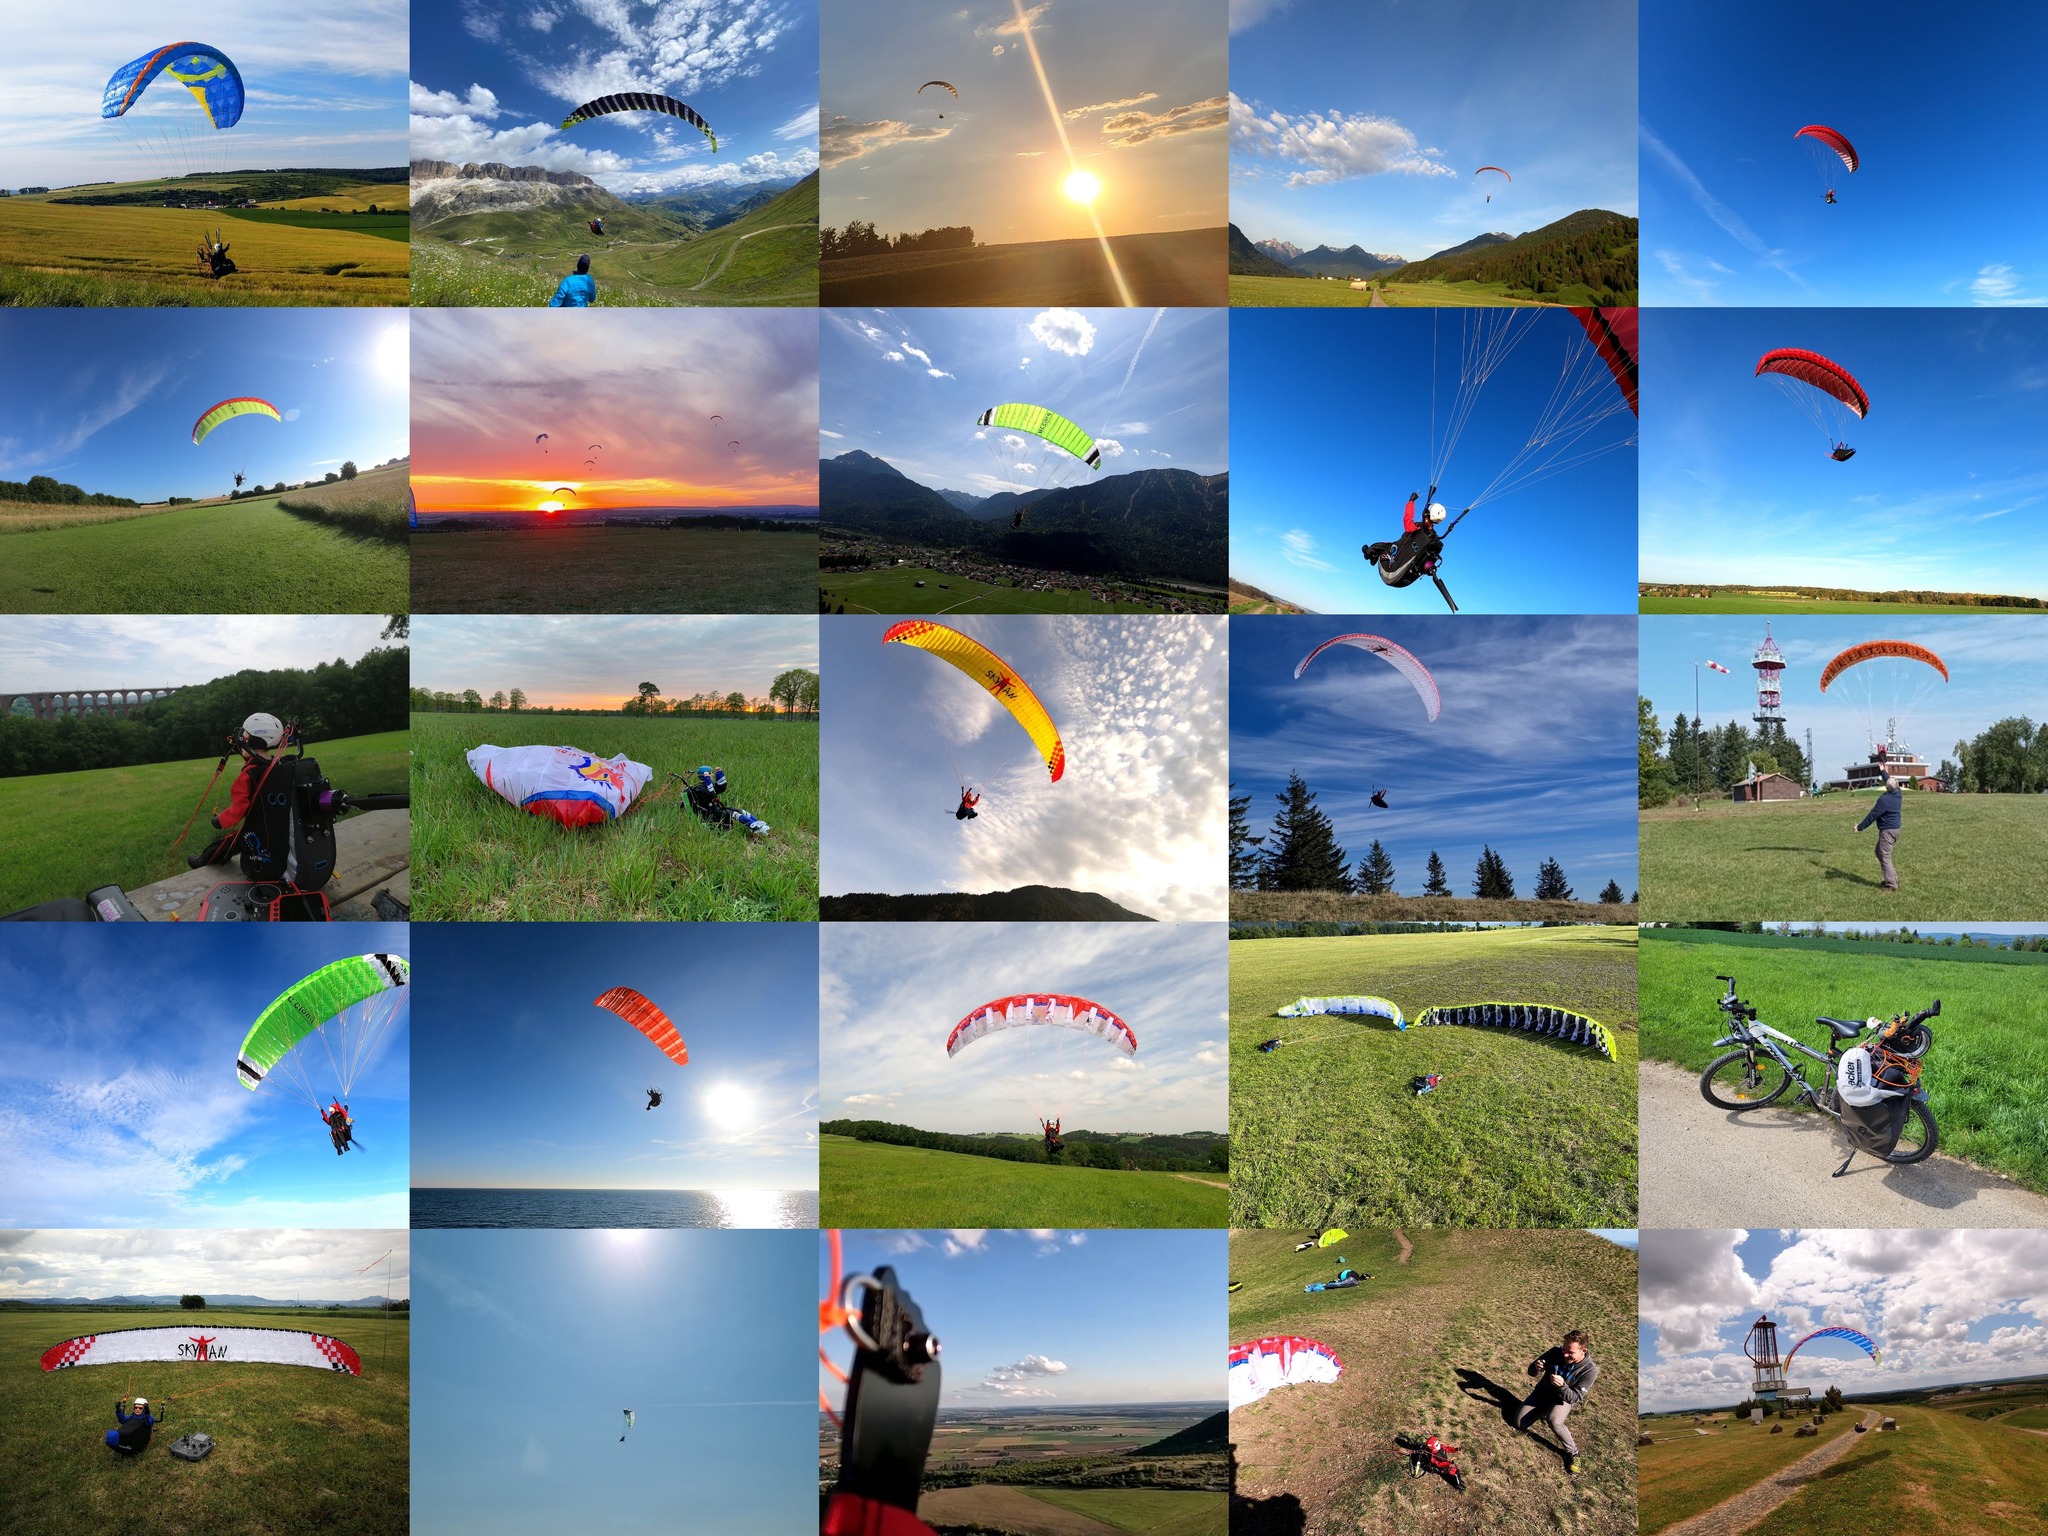 RC-Paragliding can be so beautiful